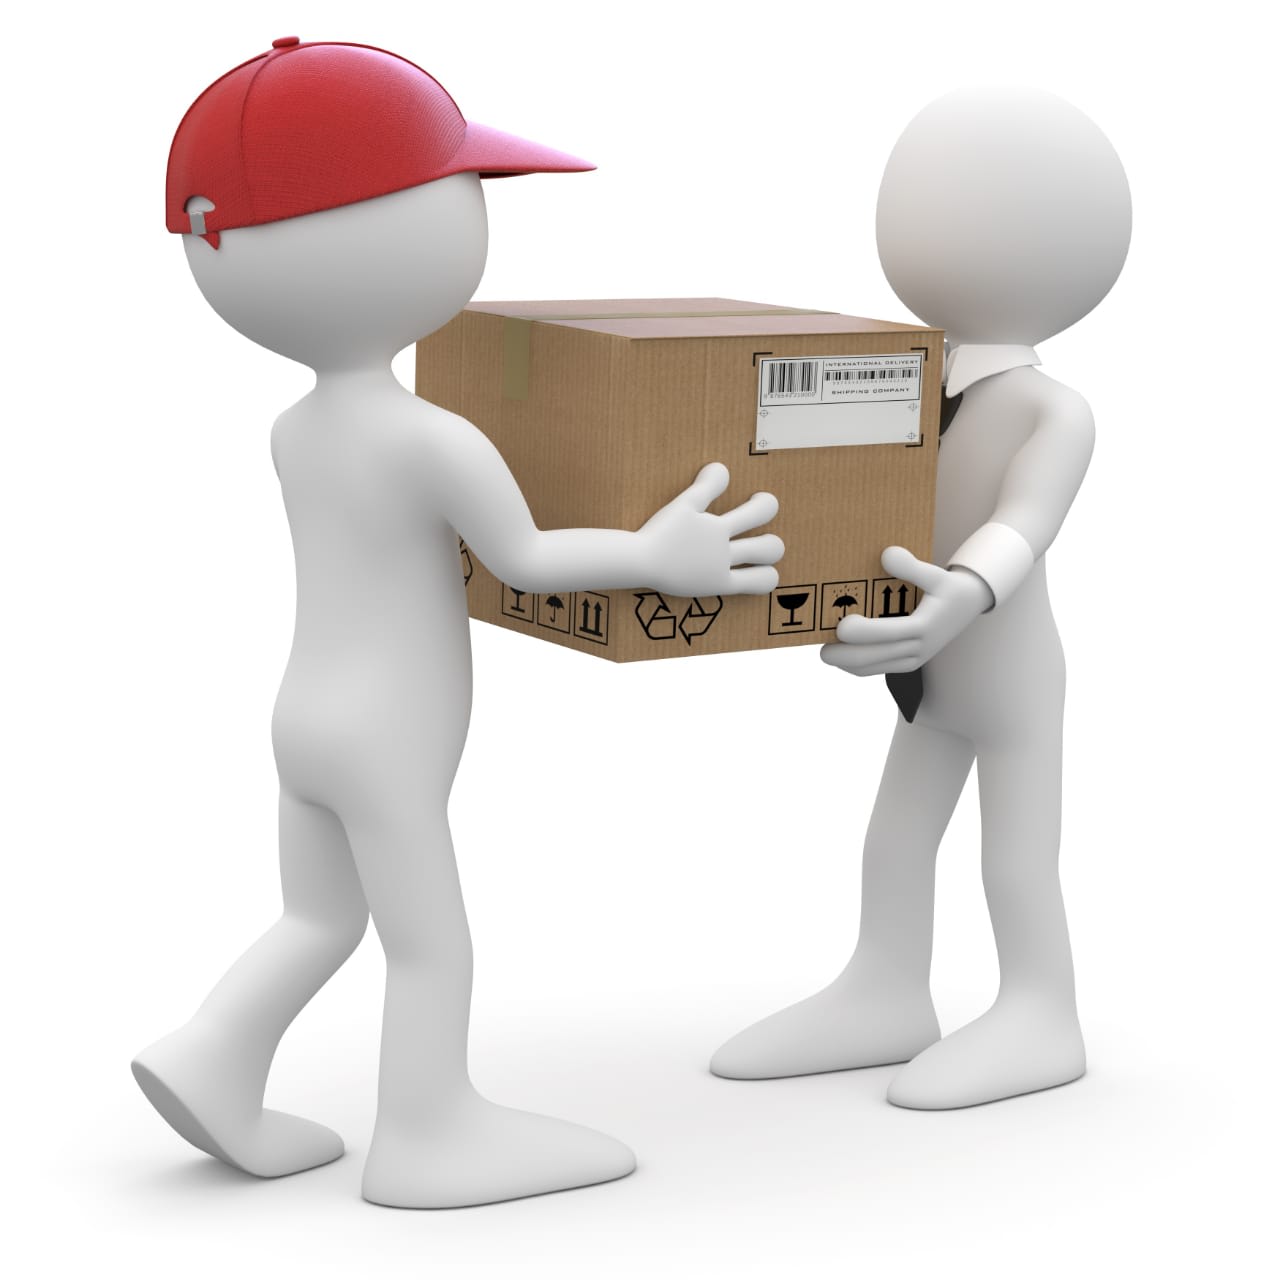 Sahara Cargo Packers And Movers